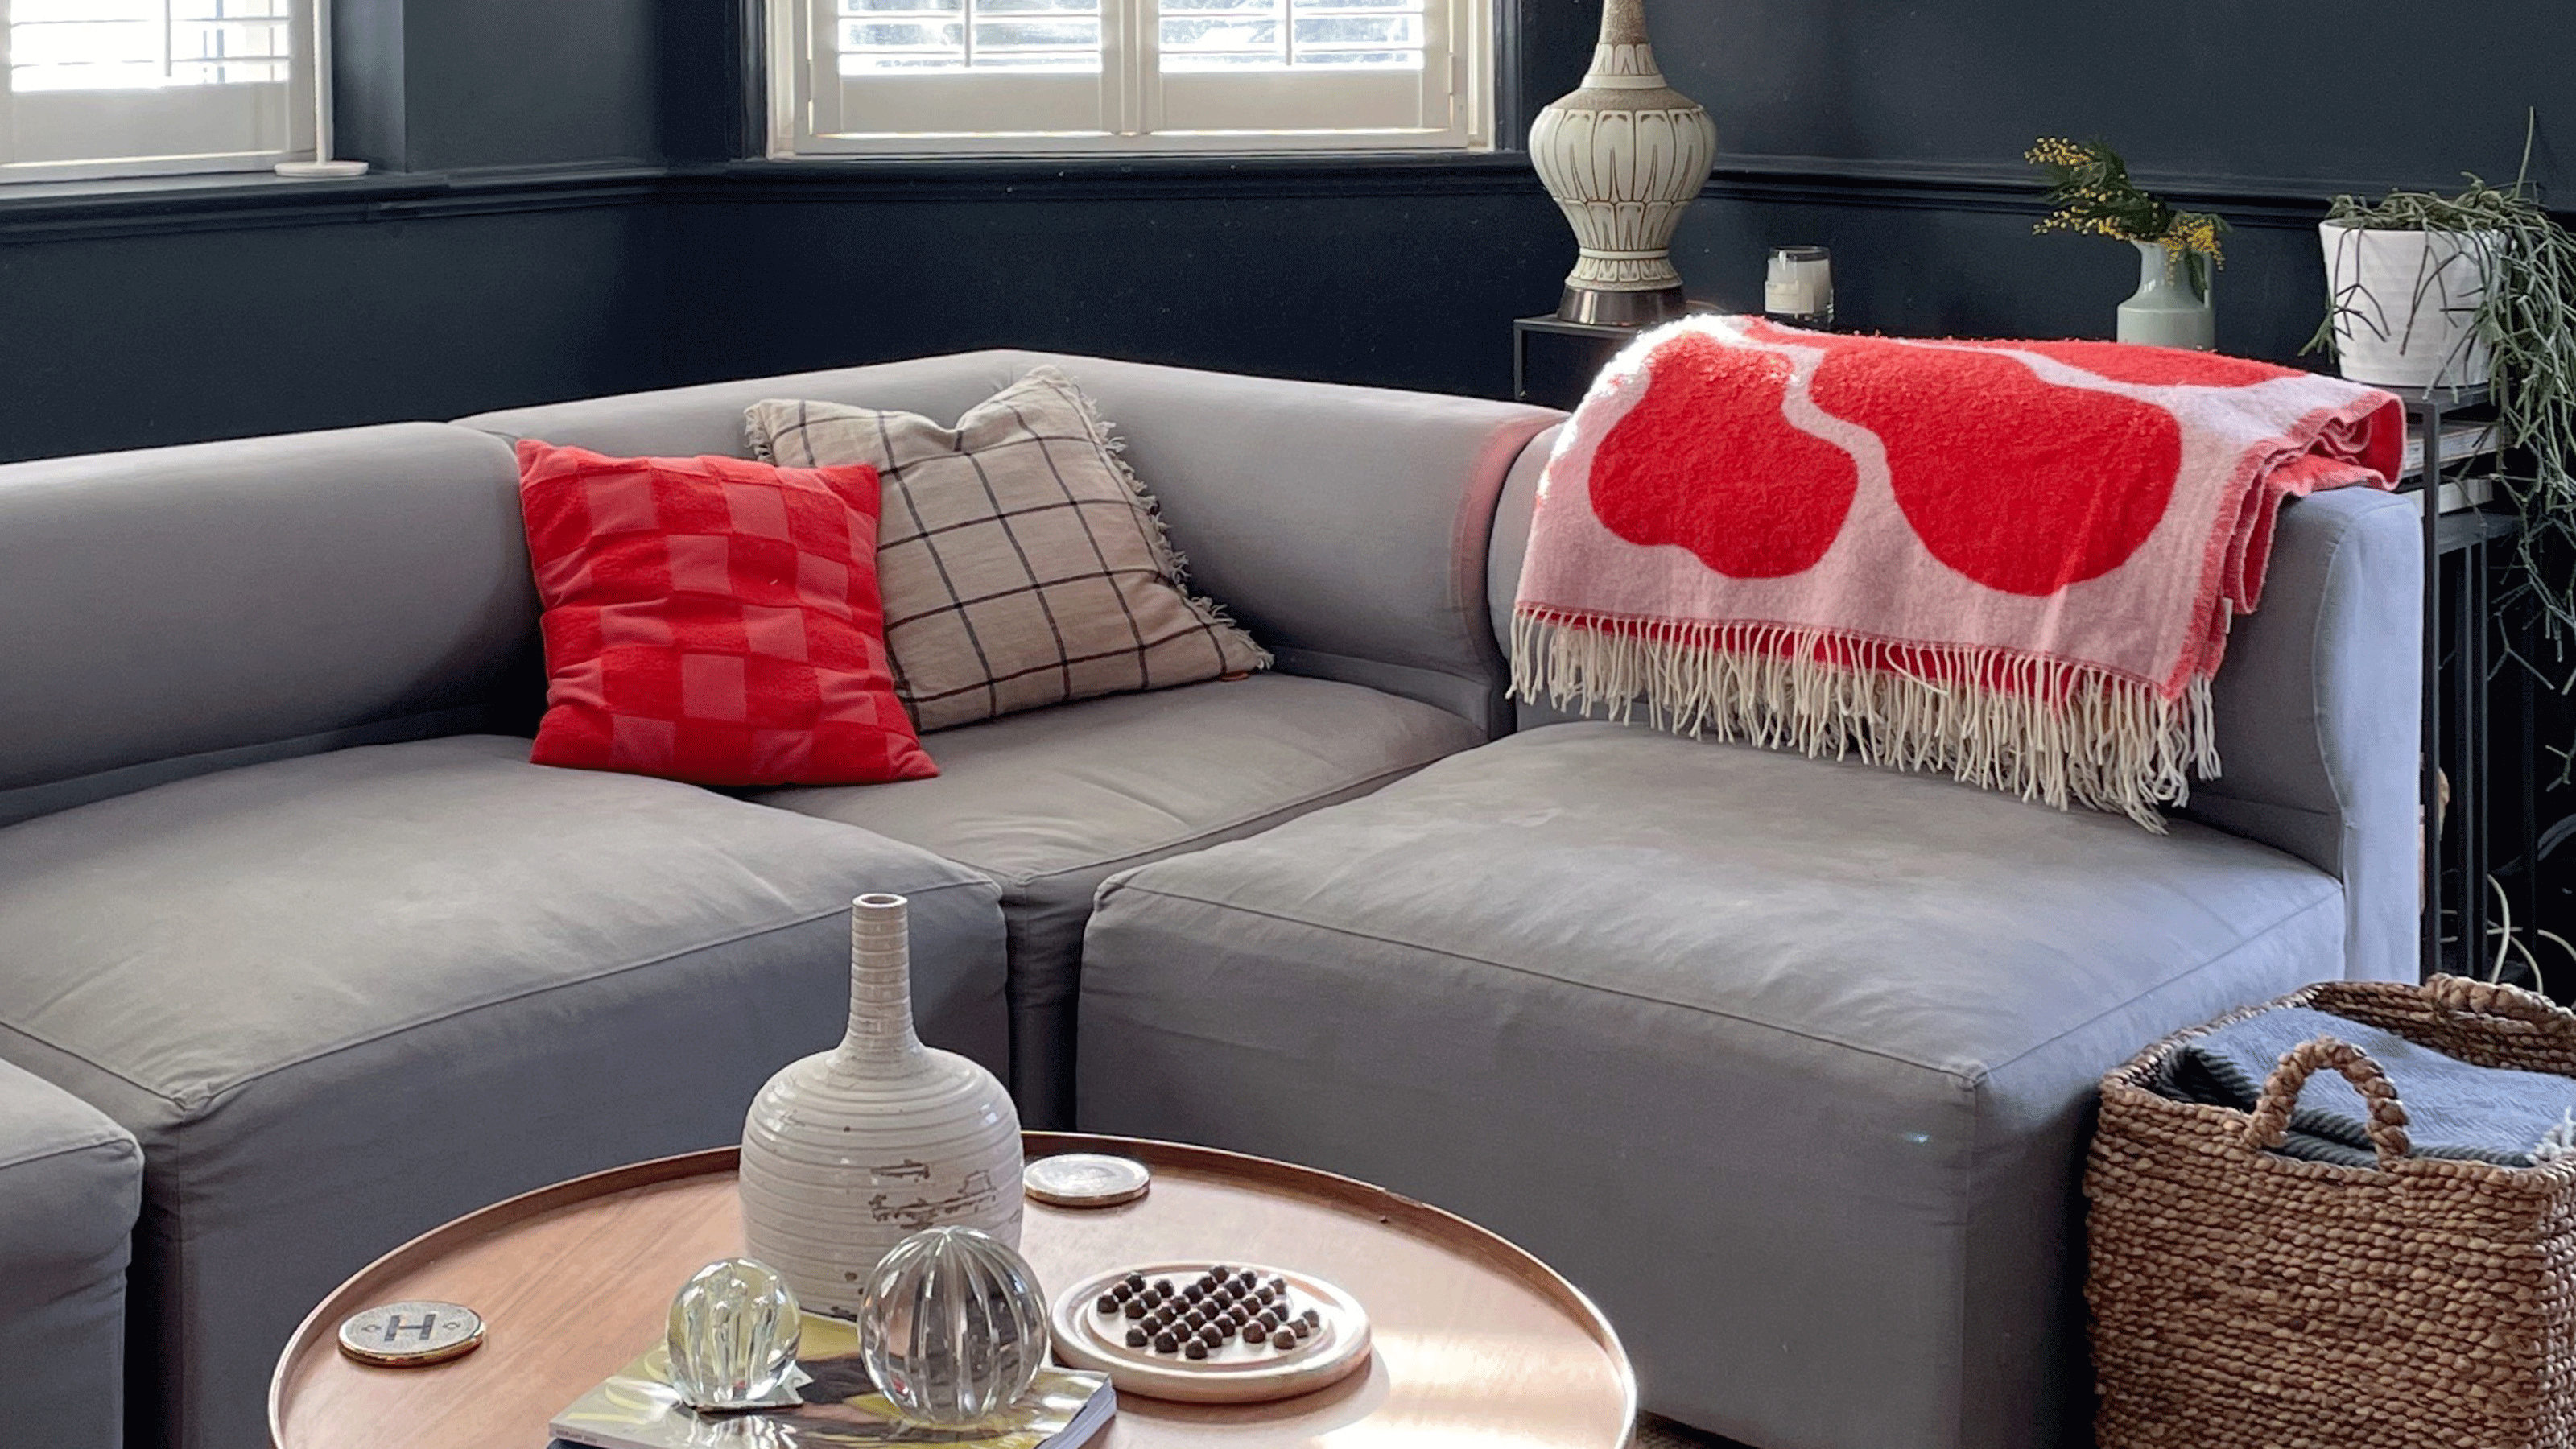 black living room with grey sofa and pink blanket